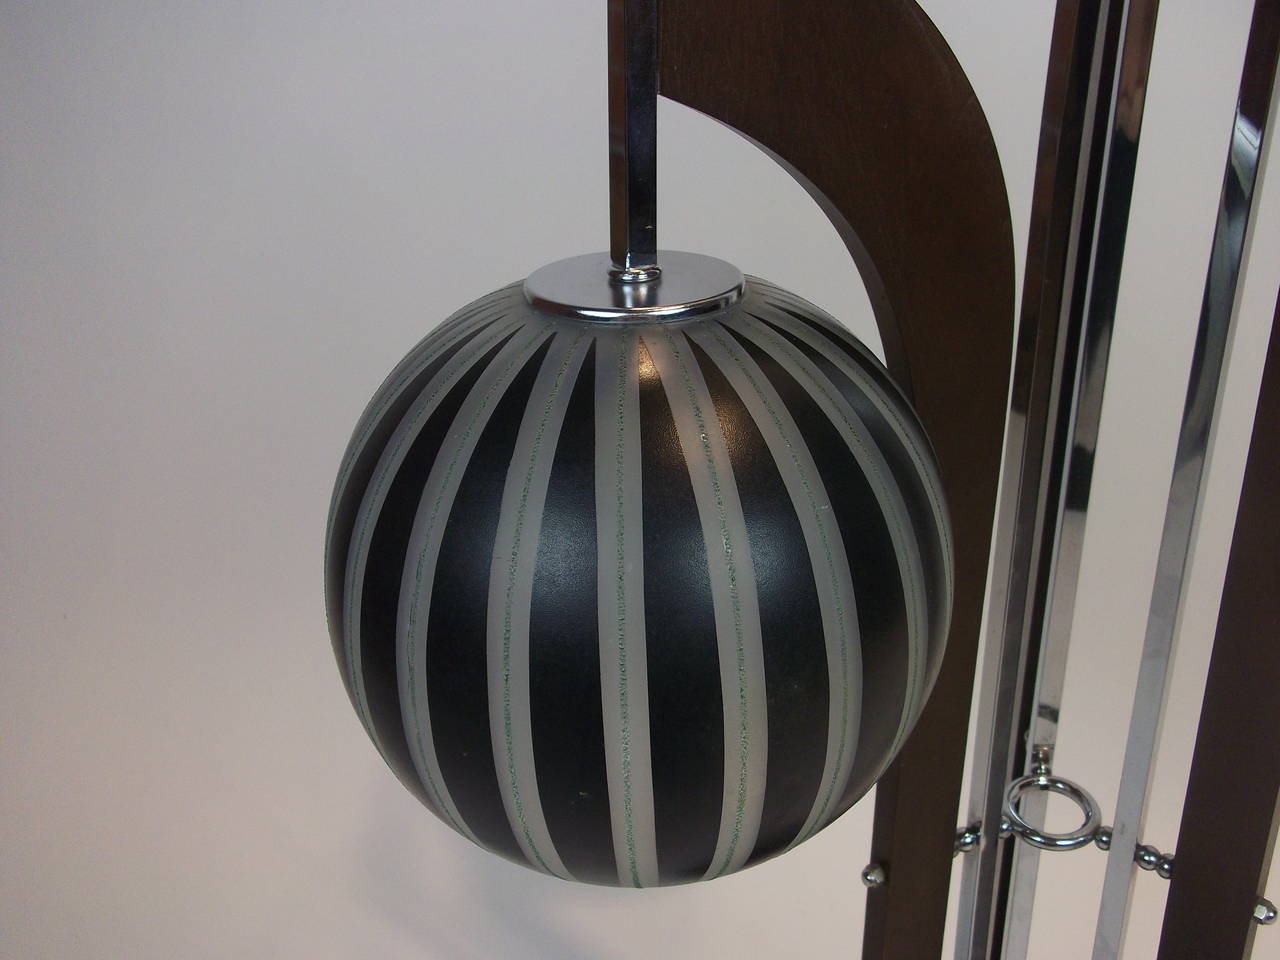 Exceptional Mid-Century Modern Three-Globe Lamp In Excellent Condition For Sale In Victoria, British Columbia